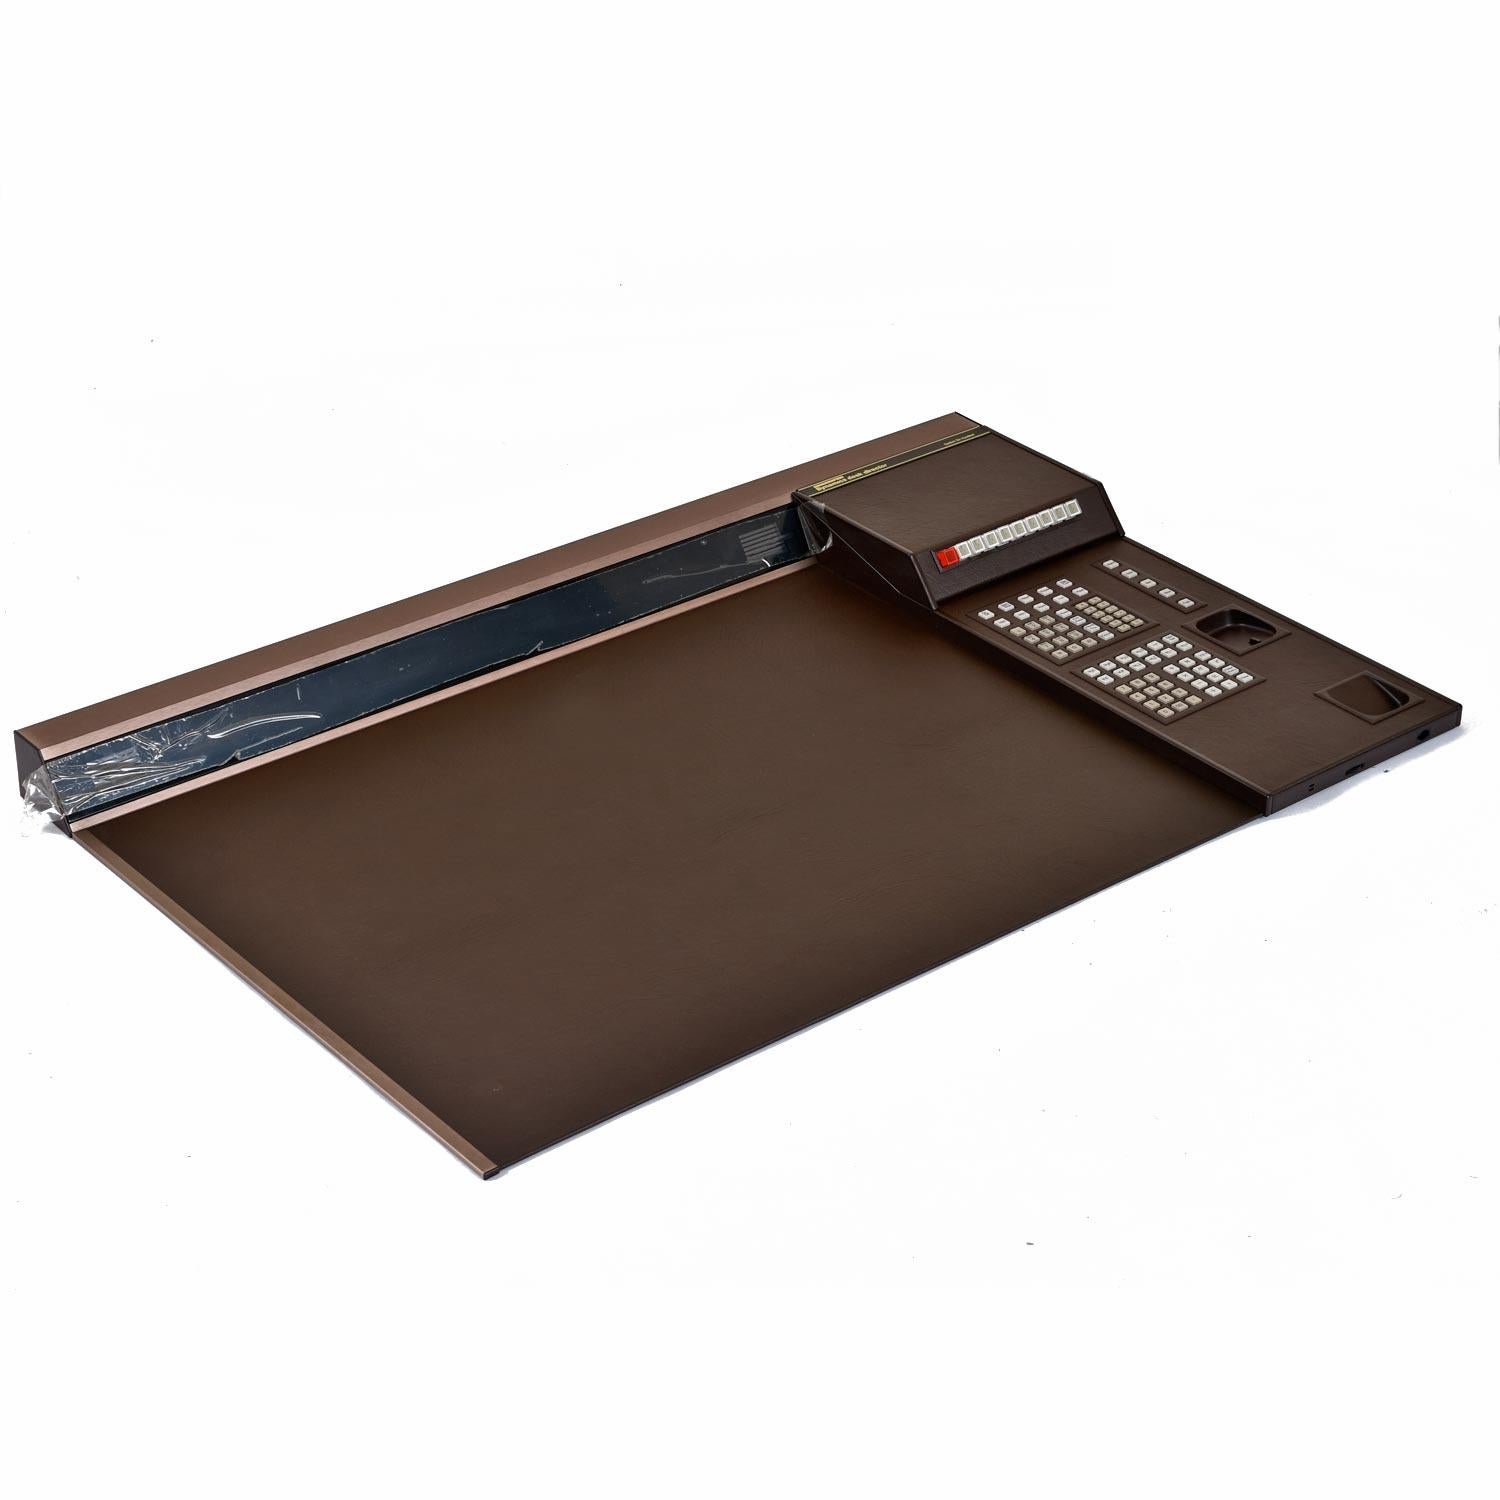 No status seeking, 1980s Wall Street executive should be without this leather bound desk apprentice. More than just a novelty item, this is a rare piece of tech and design history. If you can't afford a DeLorean, this desk director is the next best